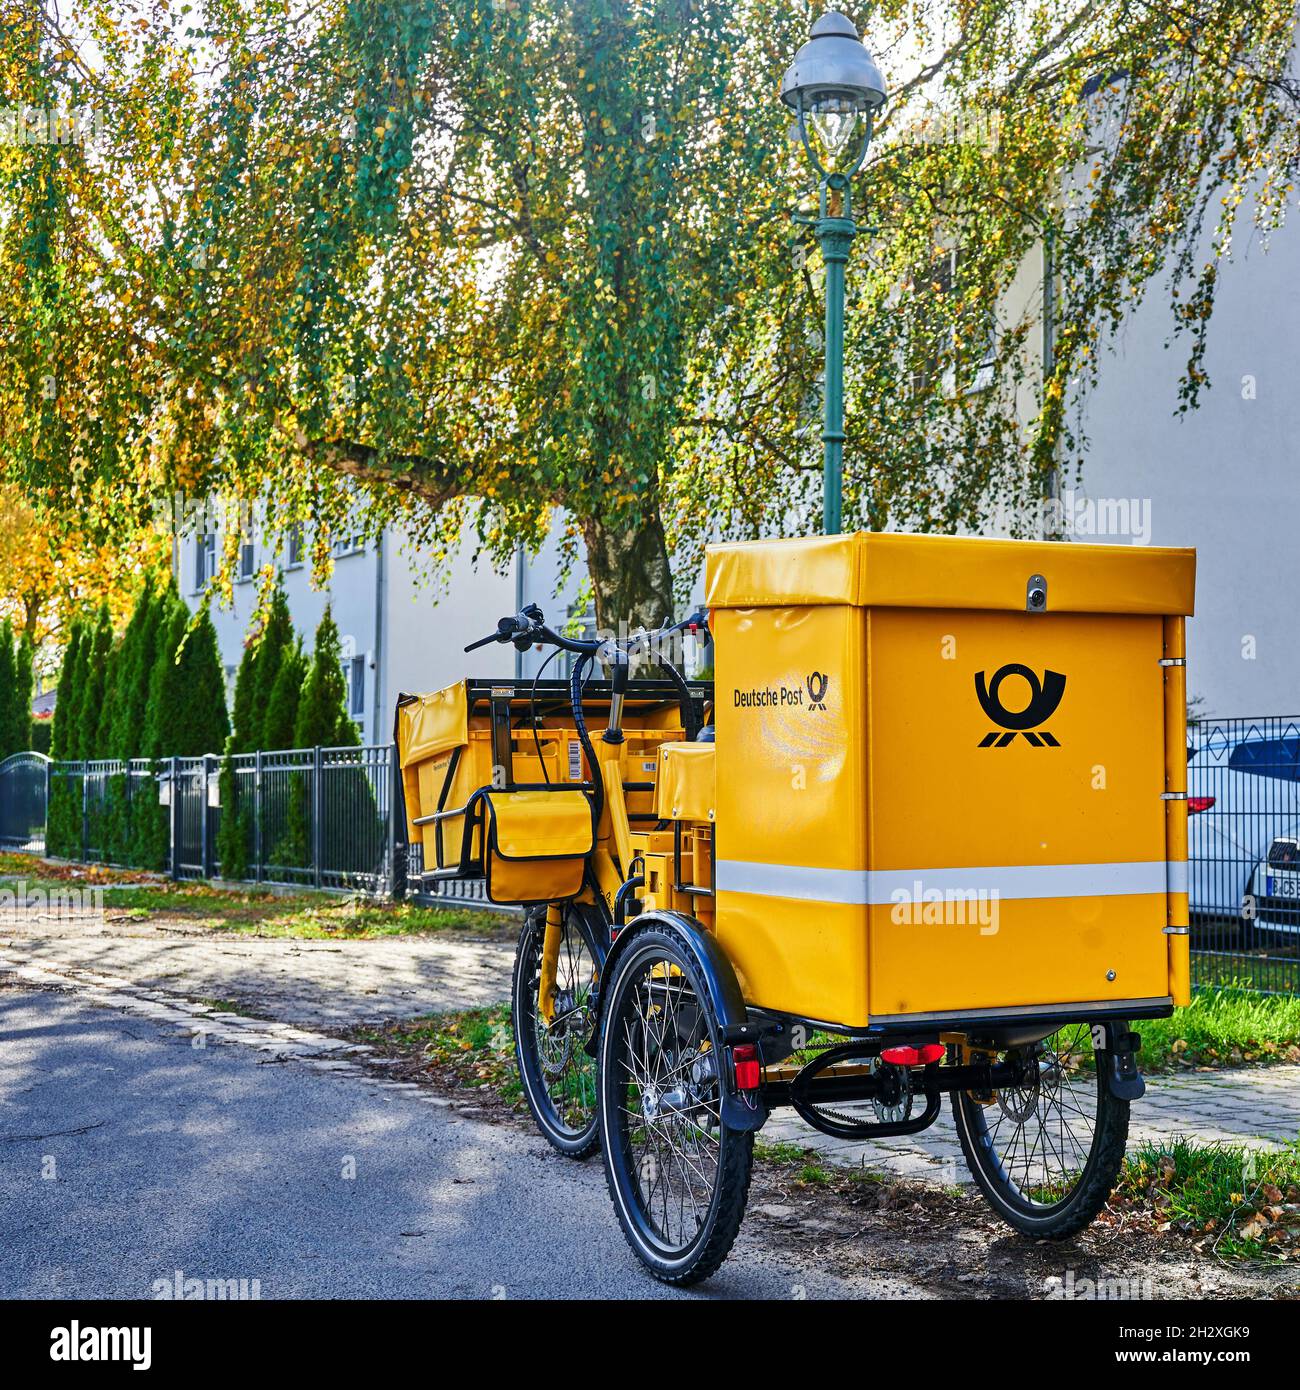 Berlin, Germany - October 23, 2021: Electric tricycle from the company  Deutsche Post on a street near the urban fringe of Berlin Stock Photo -  Alamy